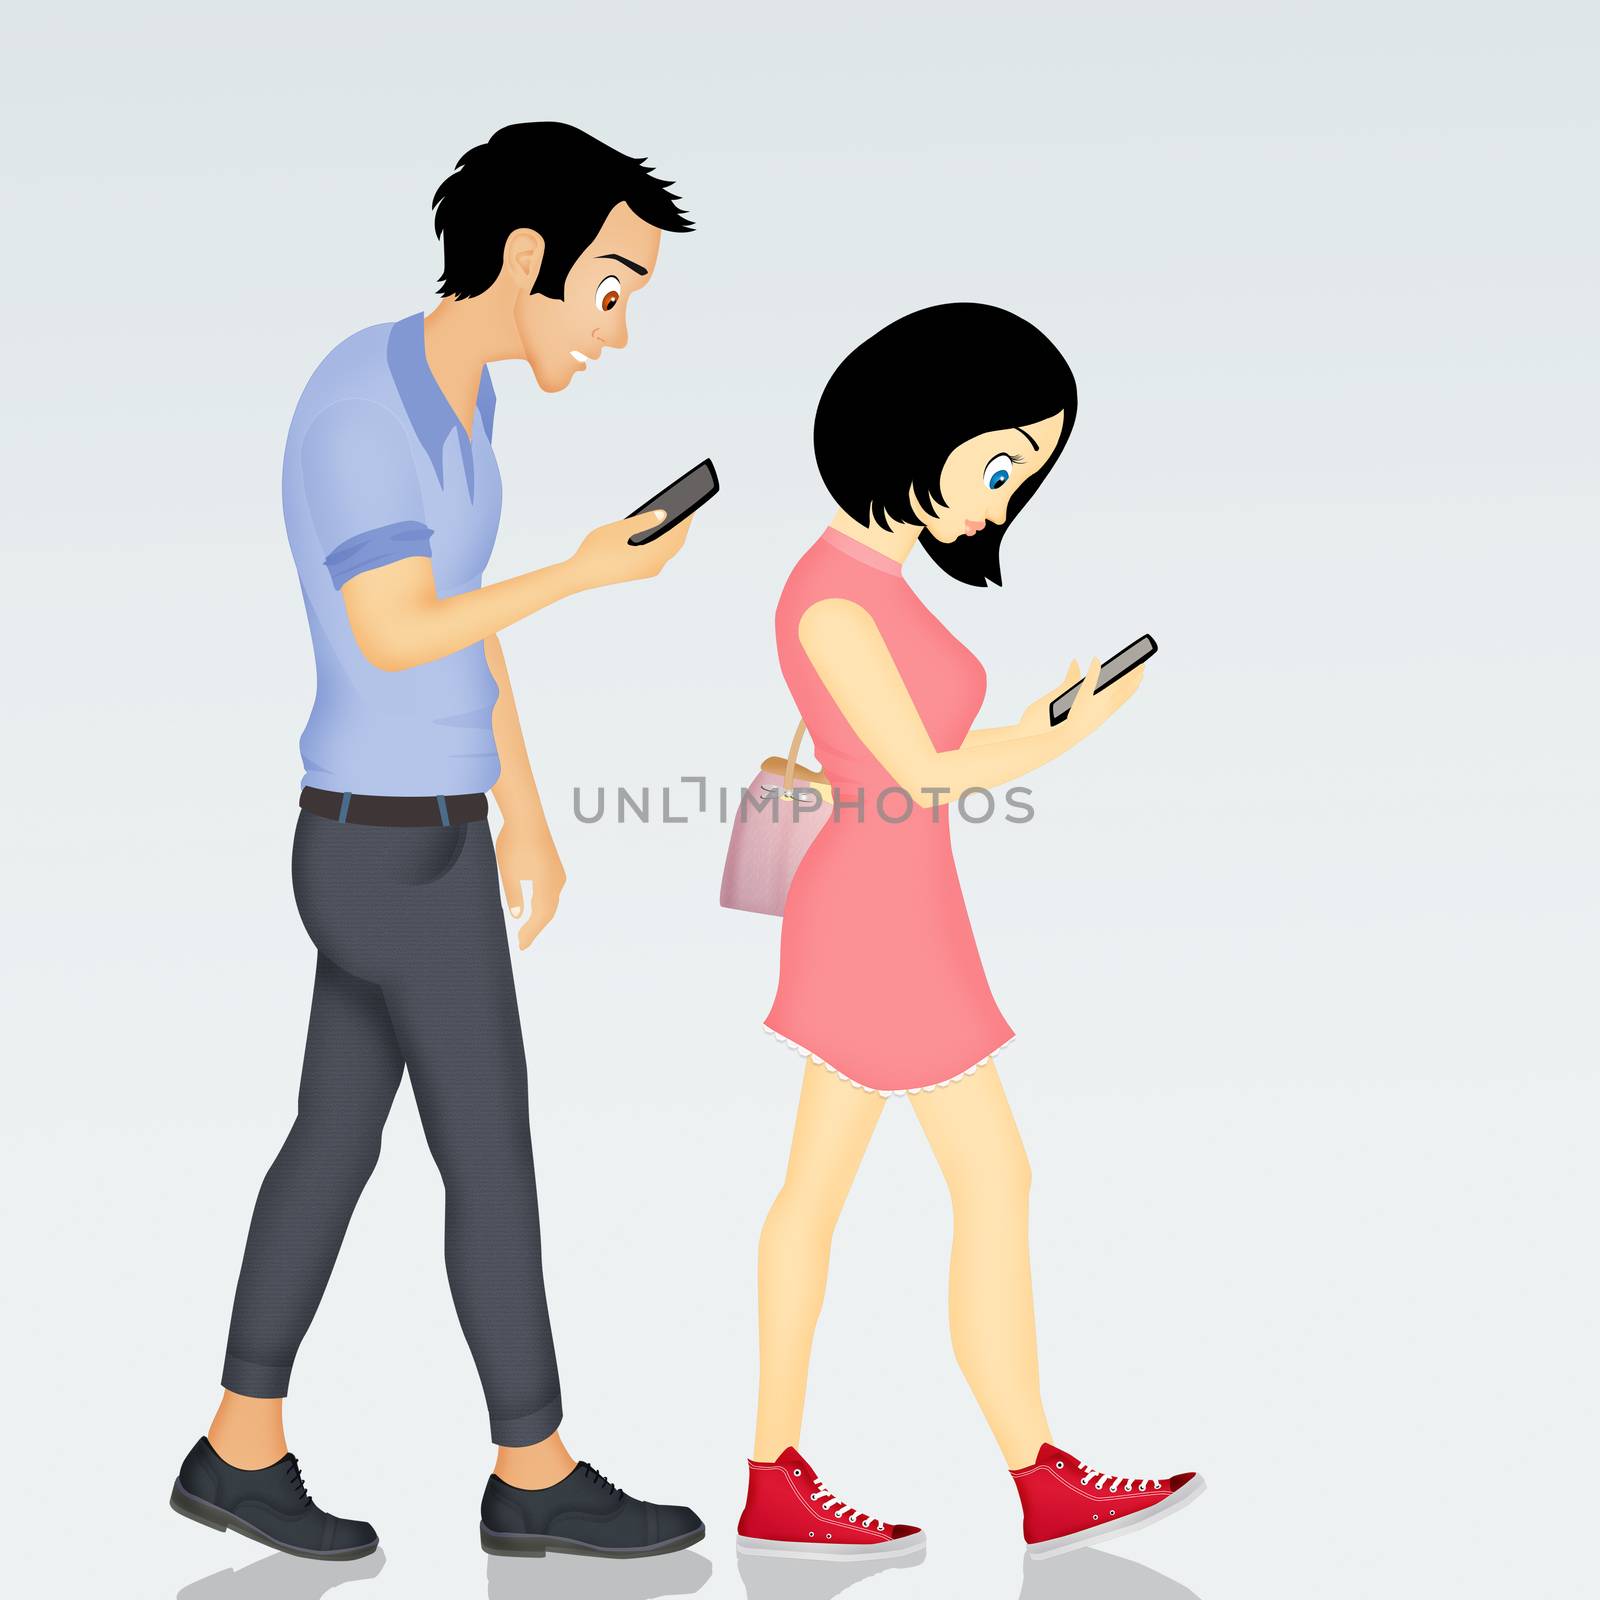 people walking with smartphones by adrenalina